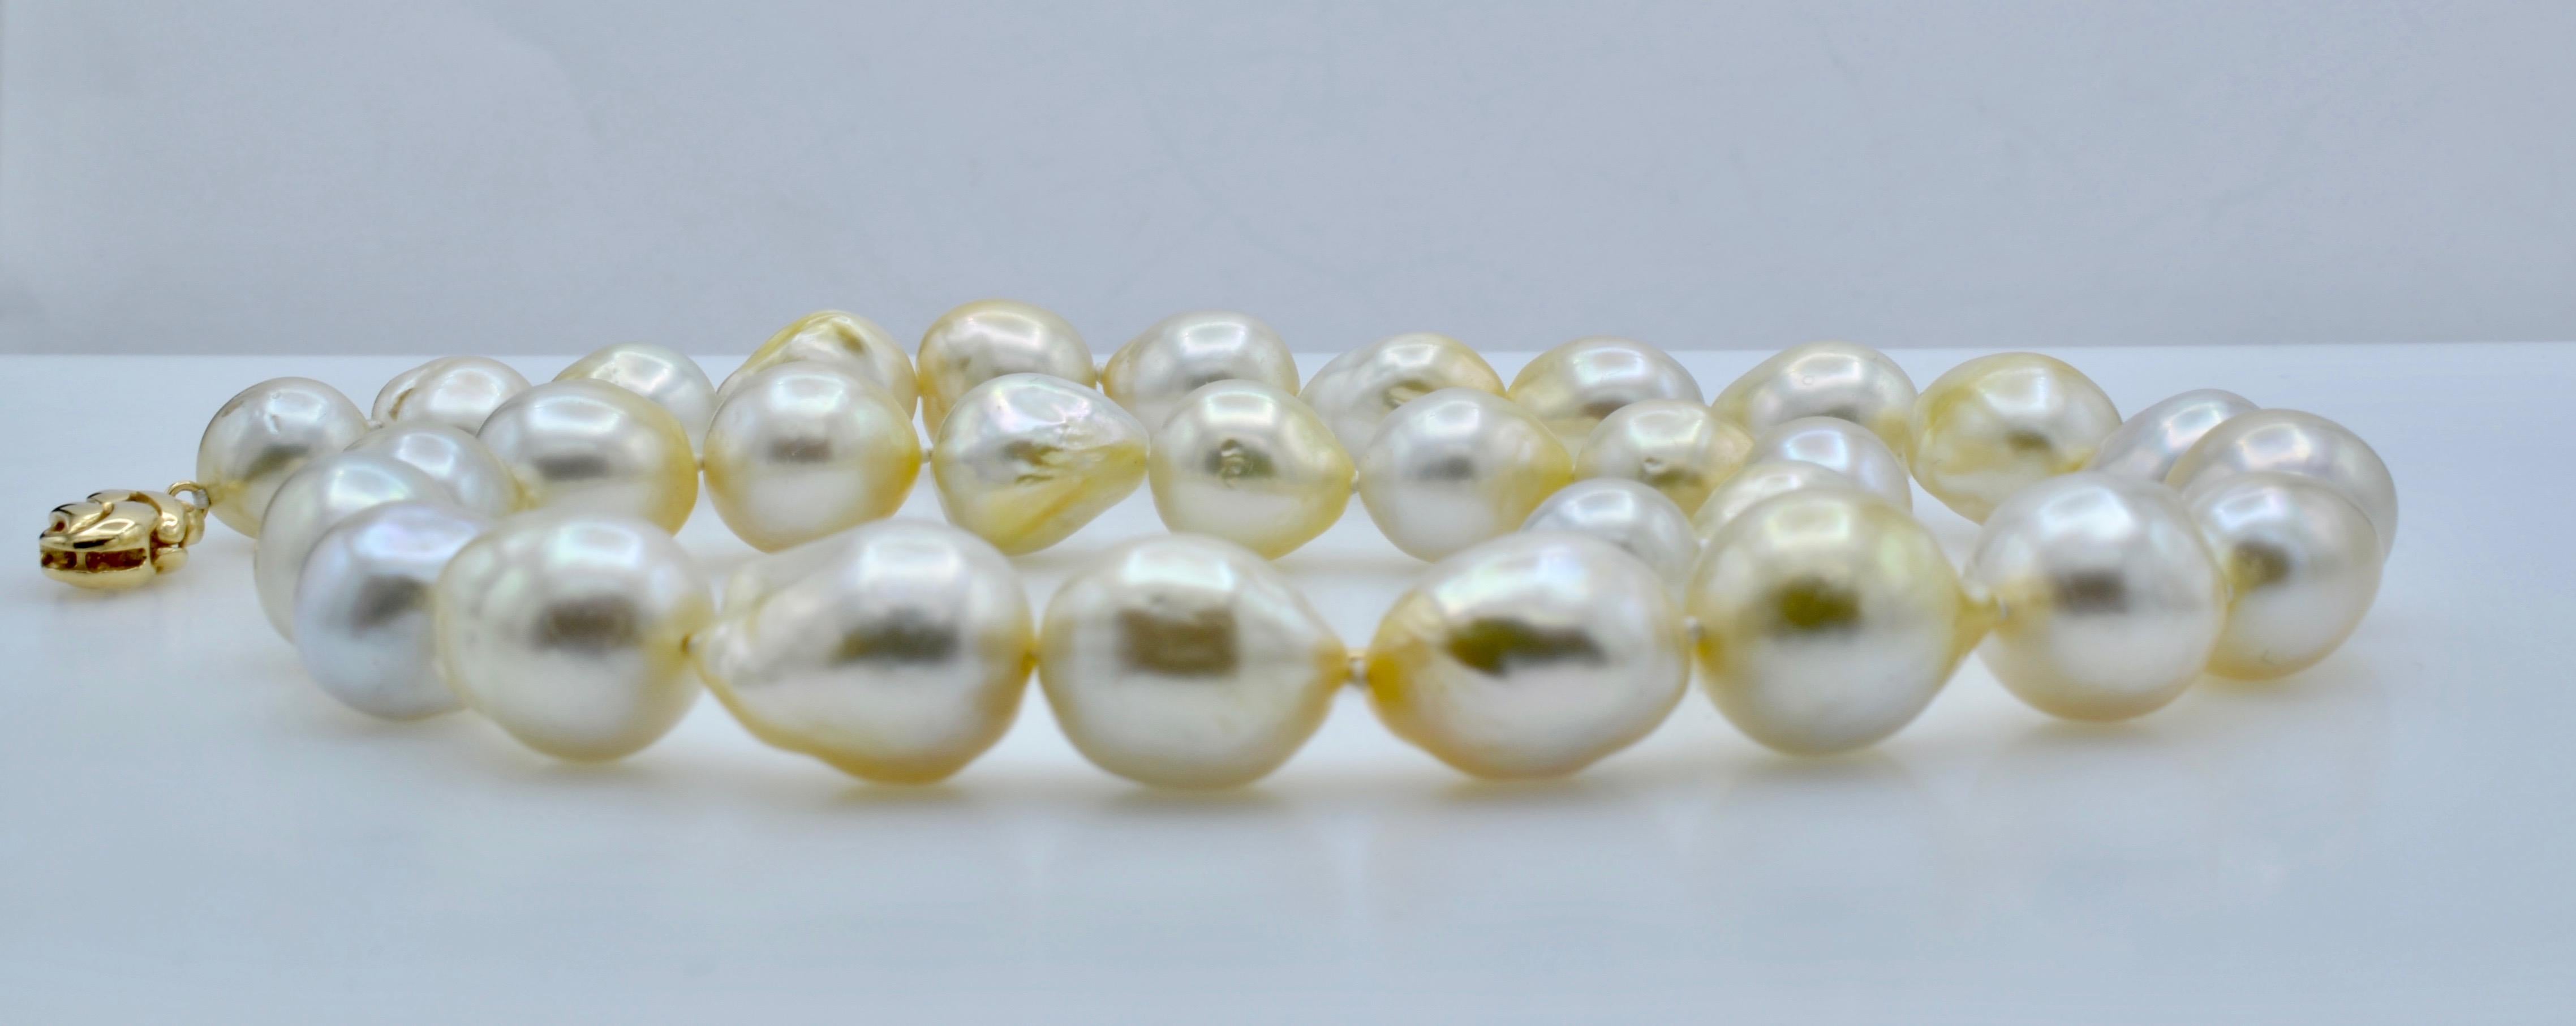 Beautiful South Sea white with a golden cast pearl necklace with a 14k gold clasp. 31 pearls from 11.5 to 16 mm and with a nice heavy weight of 50.7 gr 
The length is 18.5. The yummy glow of these pearls is mesmerizing!